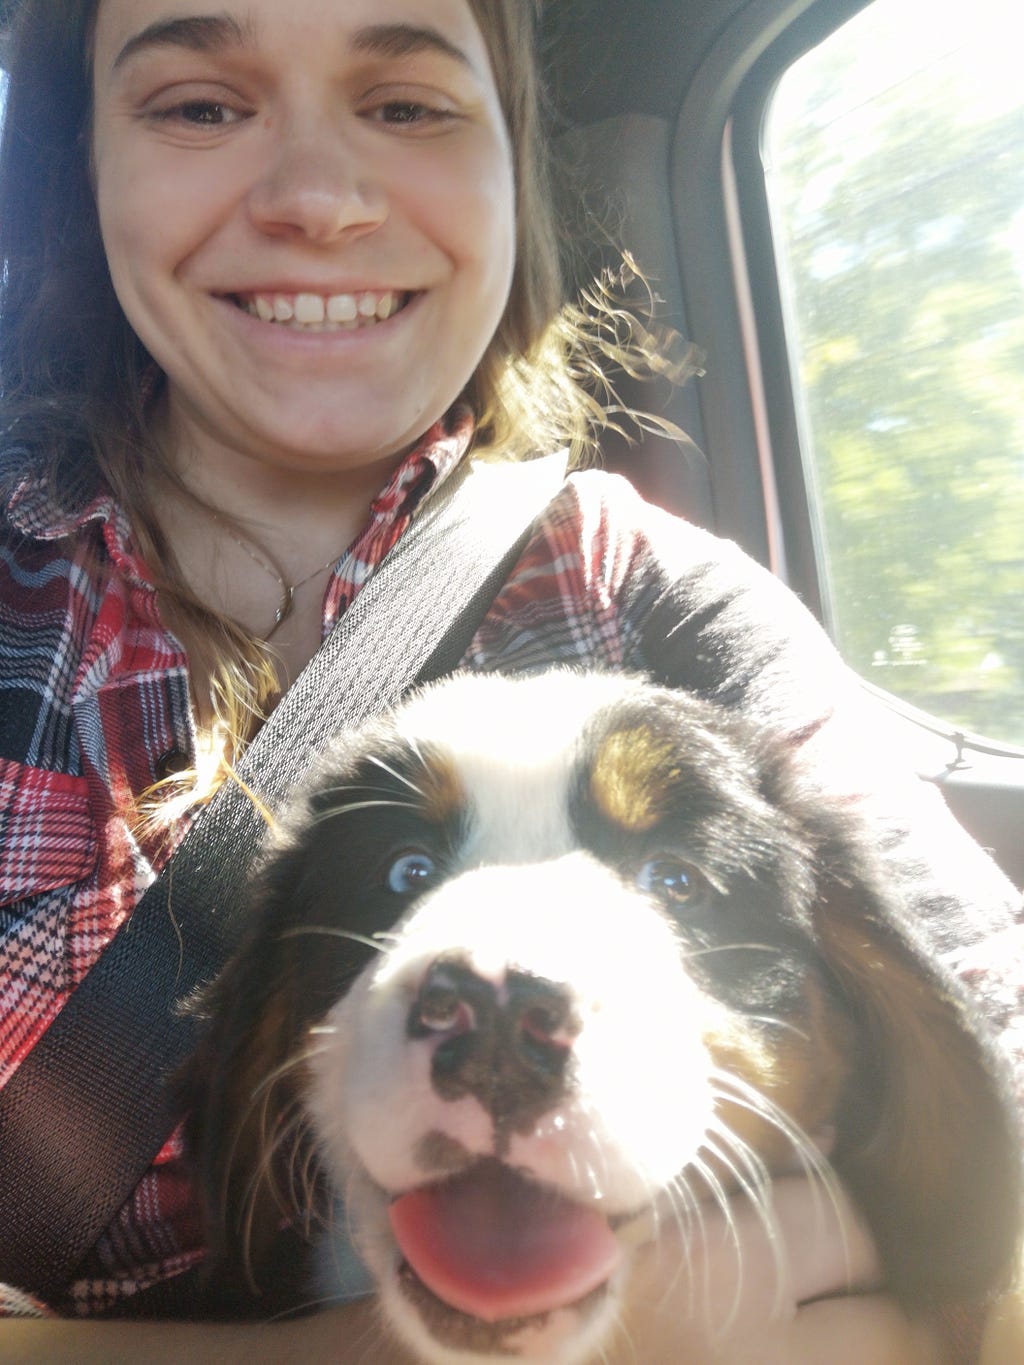 A selfie of me sitting in the back of a vehicle with my Bernese Mountain Dog, Valkyrie, who was an eight week old puppy at the time. She has one blue eye and one brown eye, which are flipped in this picture due to it accidentally being taken in mirror mode.